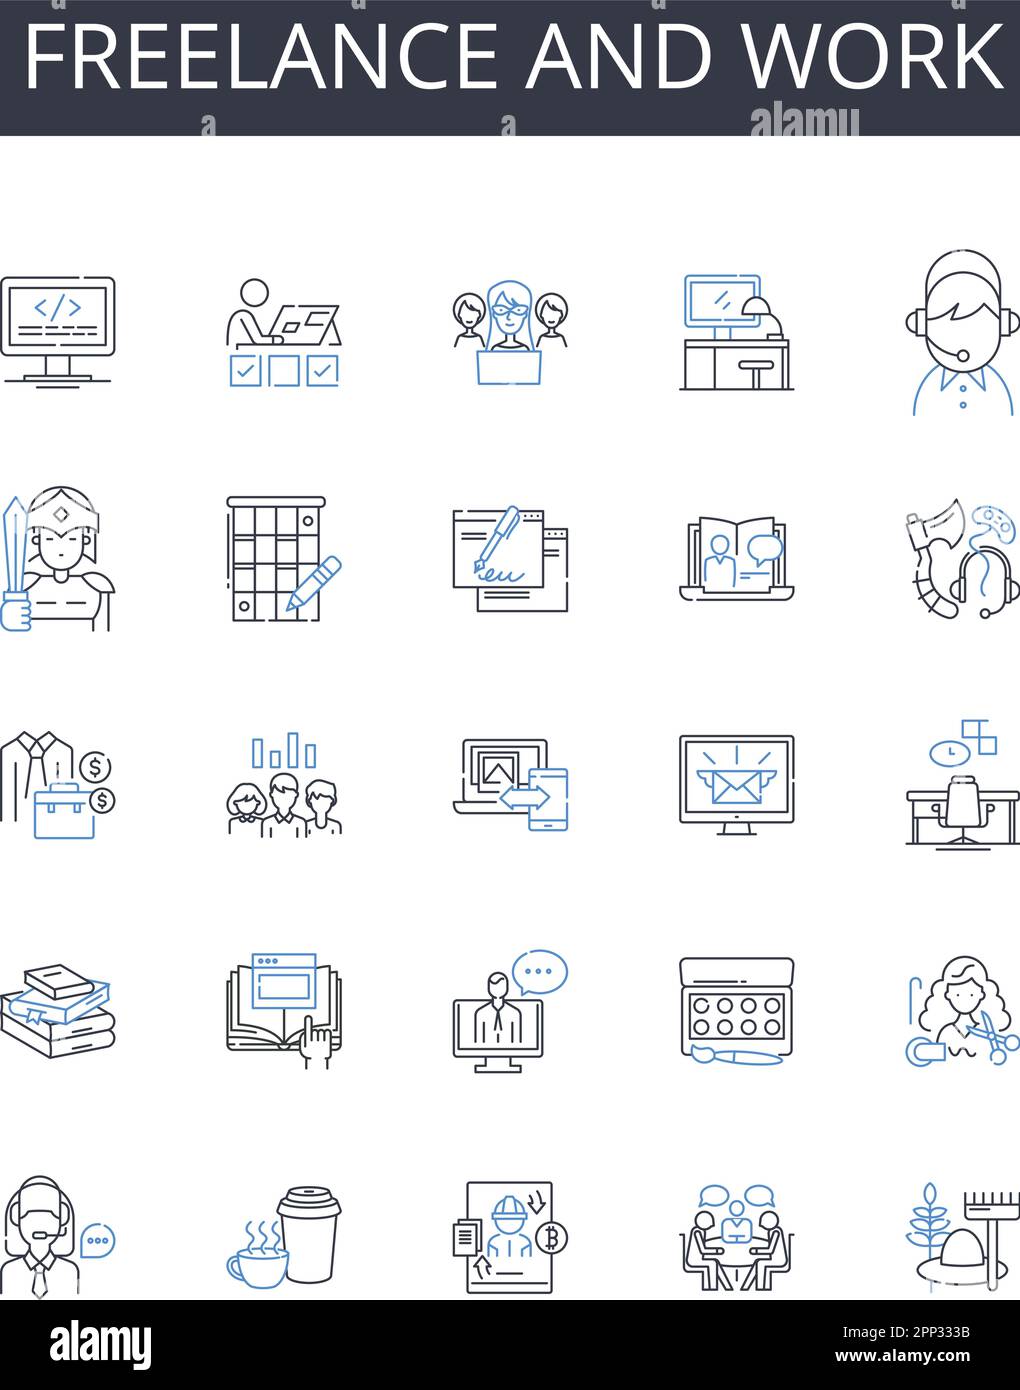 Freelance and work line icons collection. Independent, Contractual, Part-time, Project-based, Temporarily employed, Self-employed, Outsourced vector Stock Vector